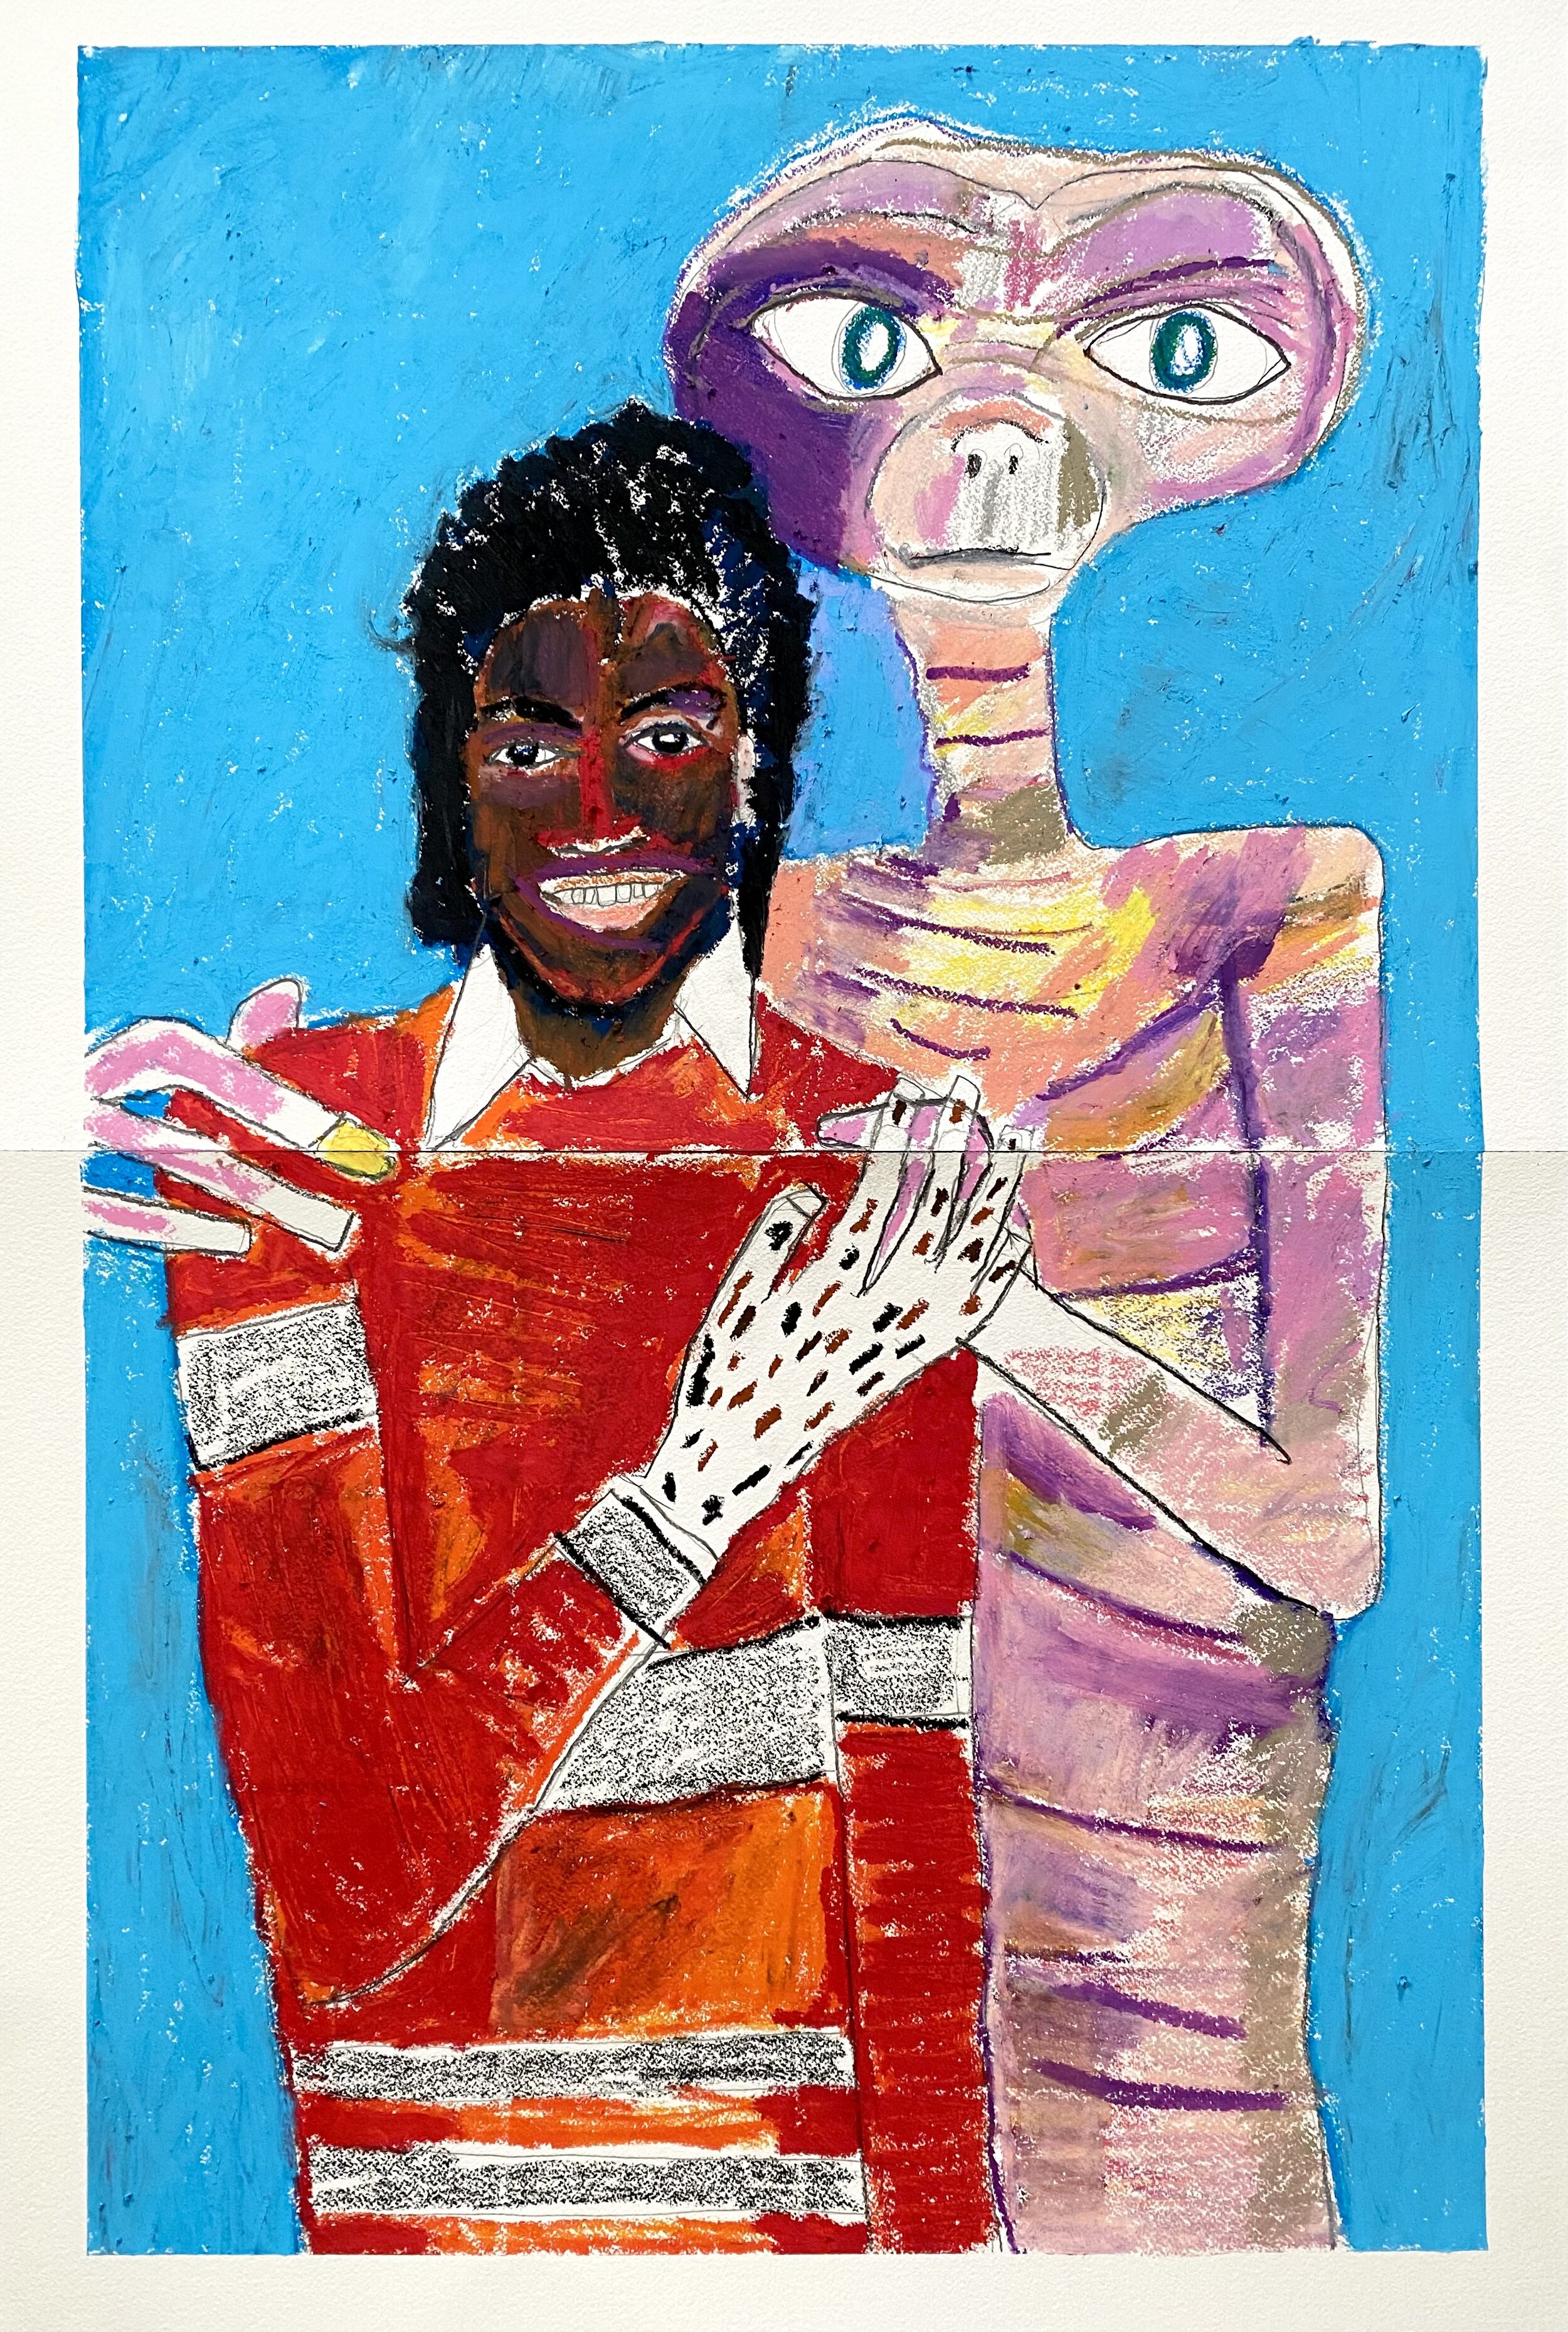 E.T. &amp; Michael Jackson The Poster 36” x 24” mixed media on paper 2021